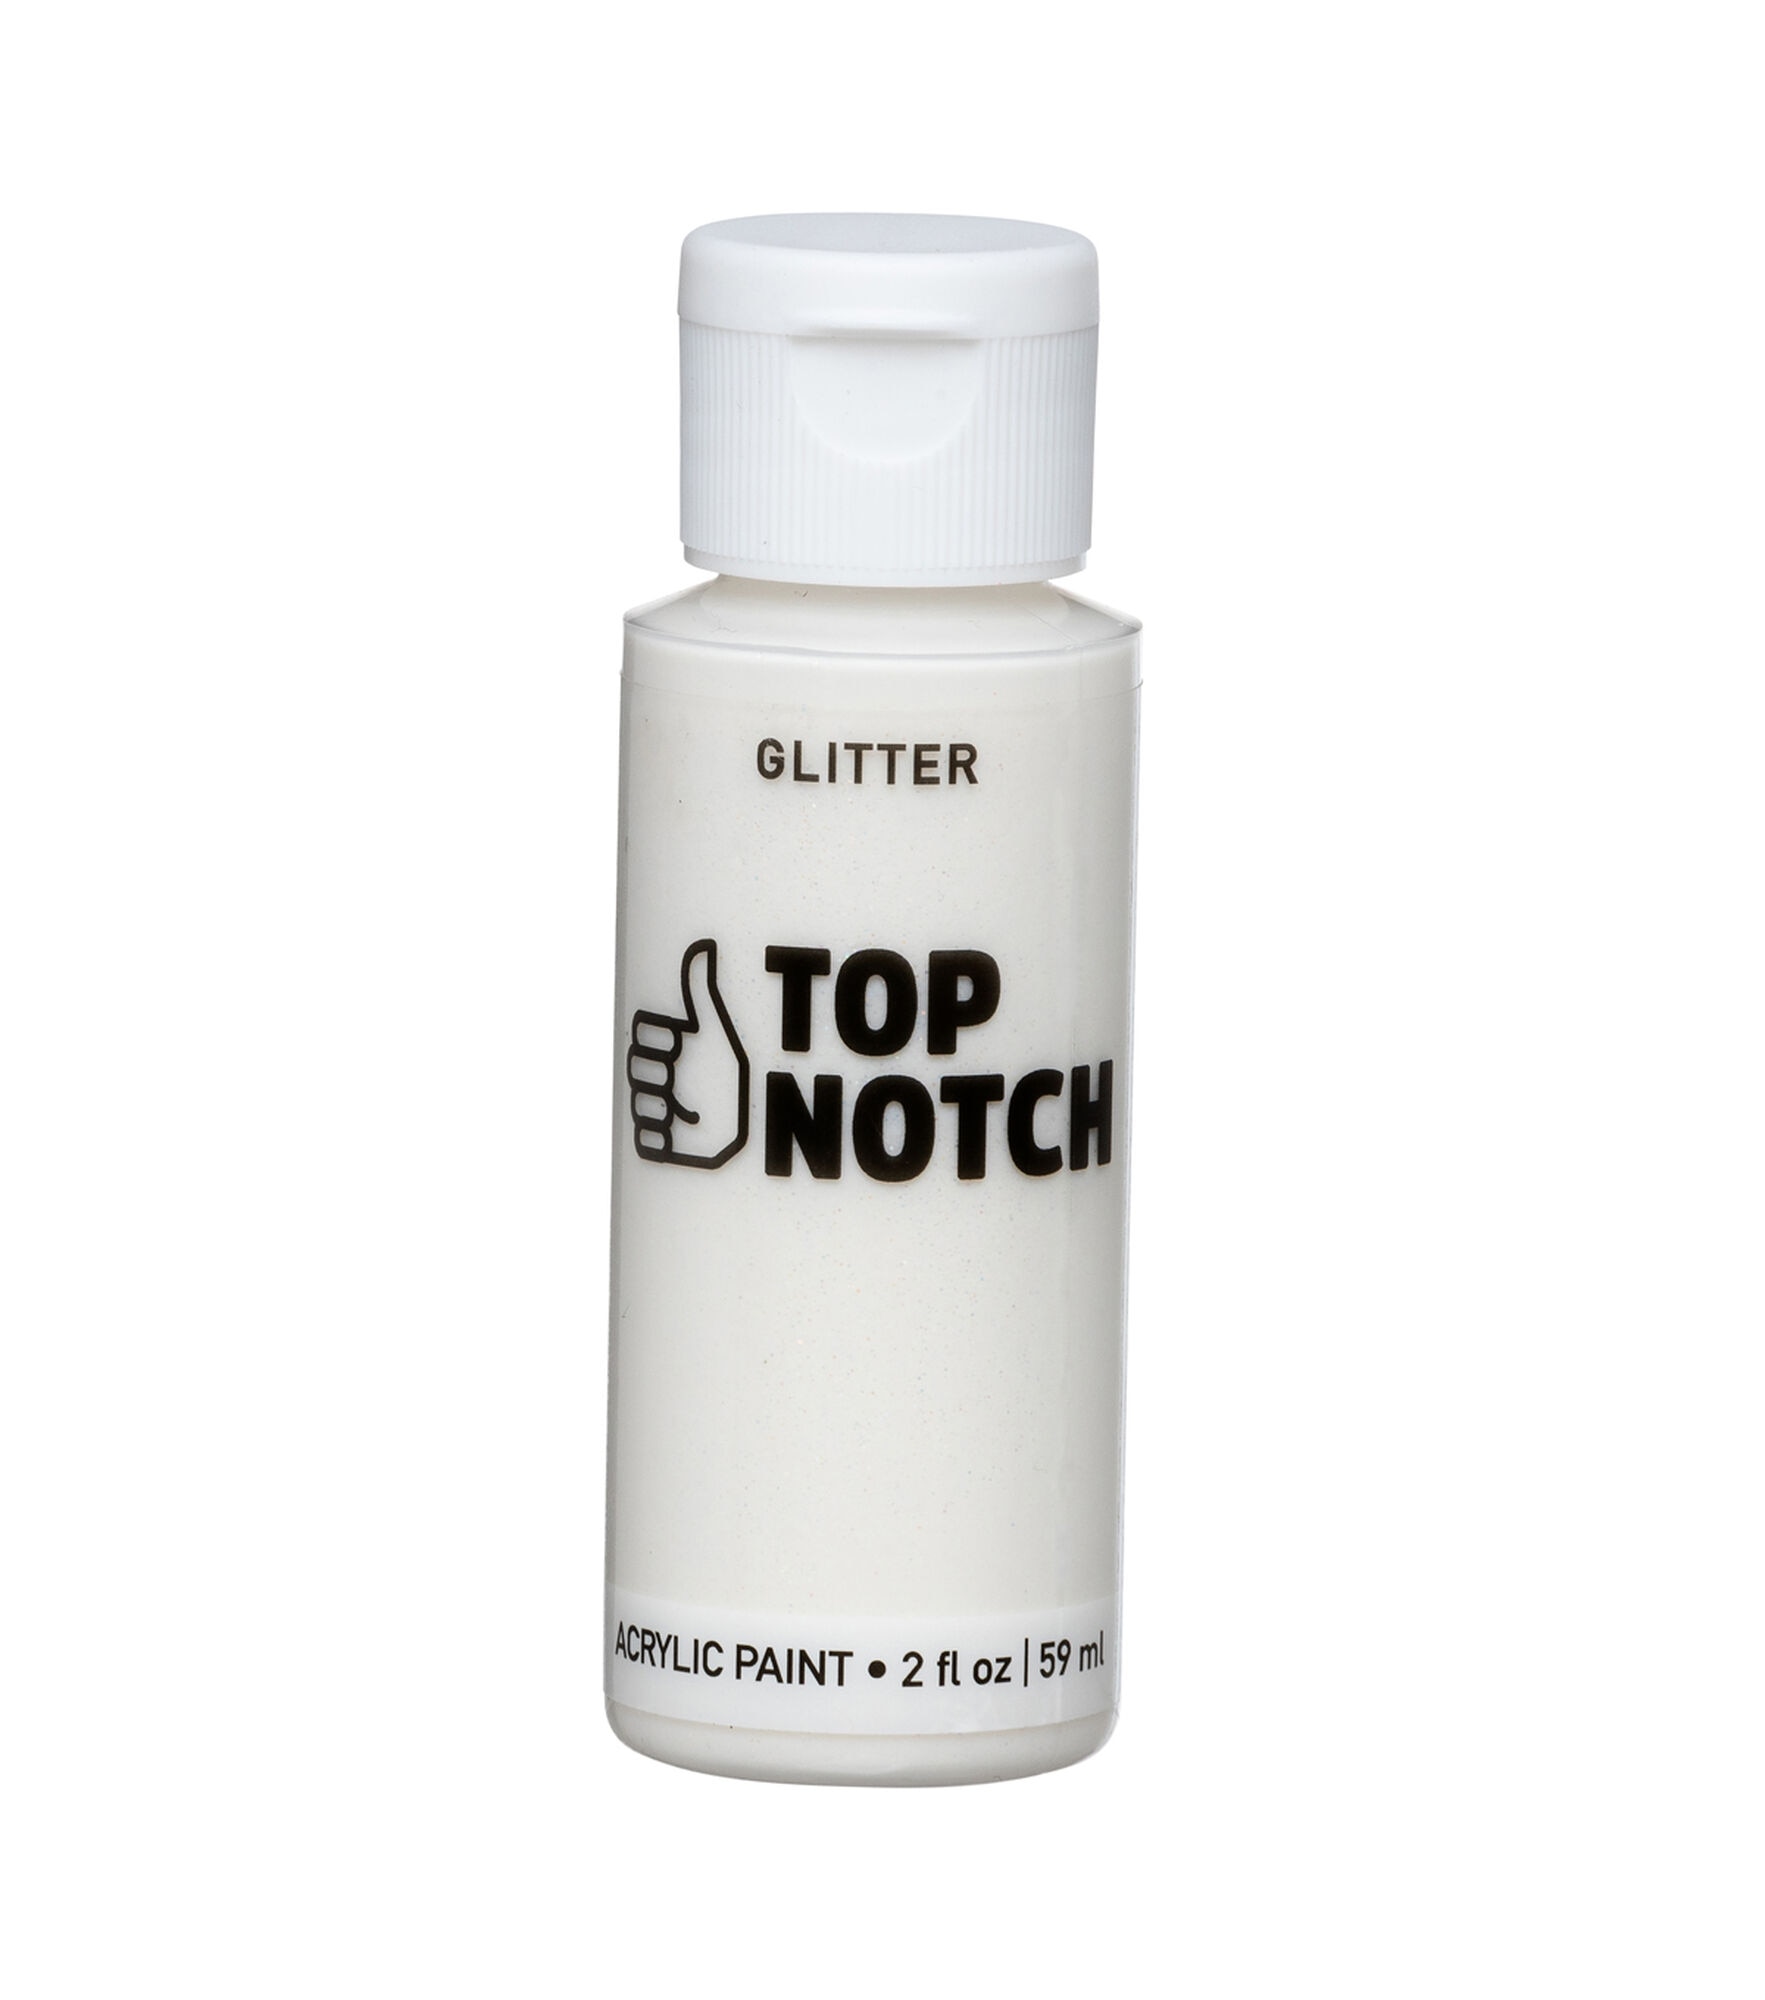 Top Notch 2oz White Glitter Acrylic Craft Paint - Crystal - Craft Paint - Art Supplies & Painting